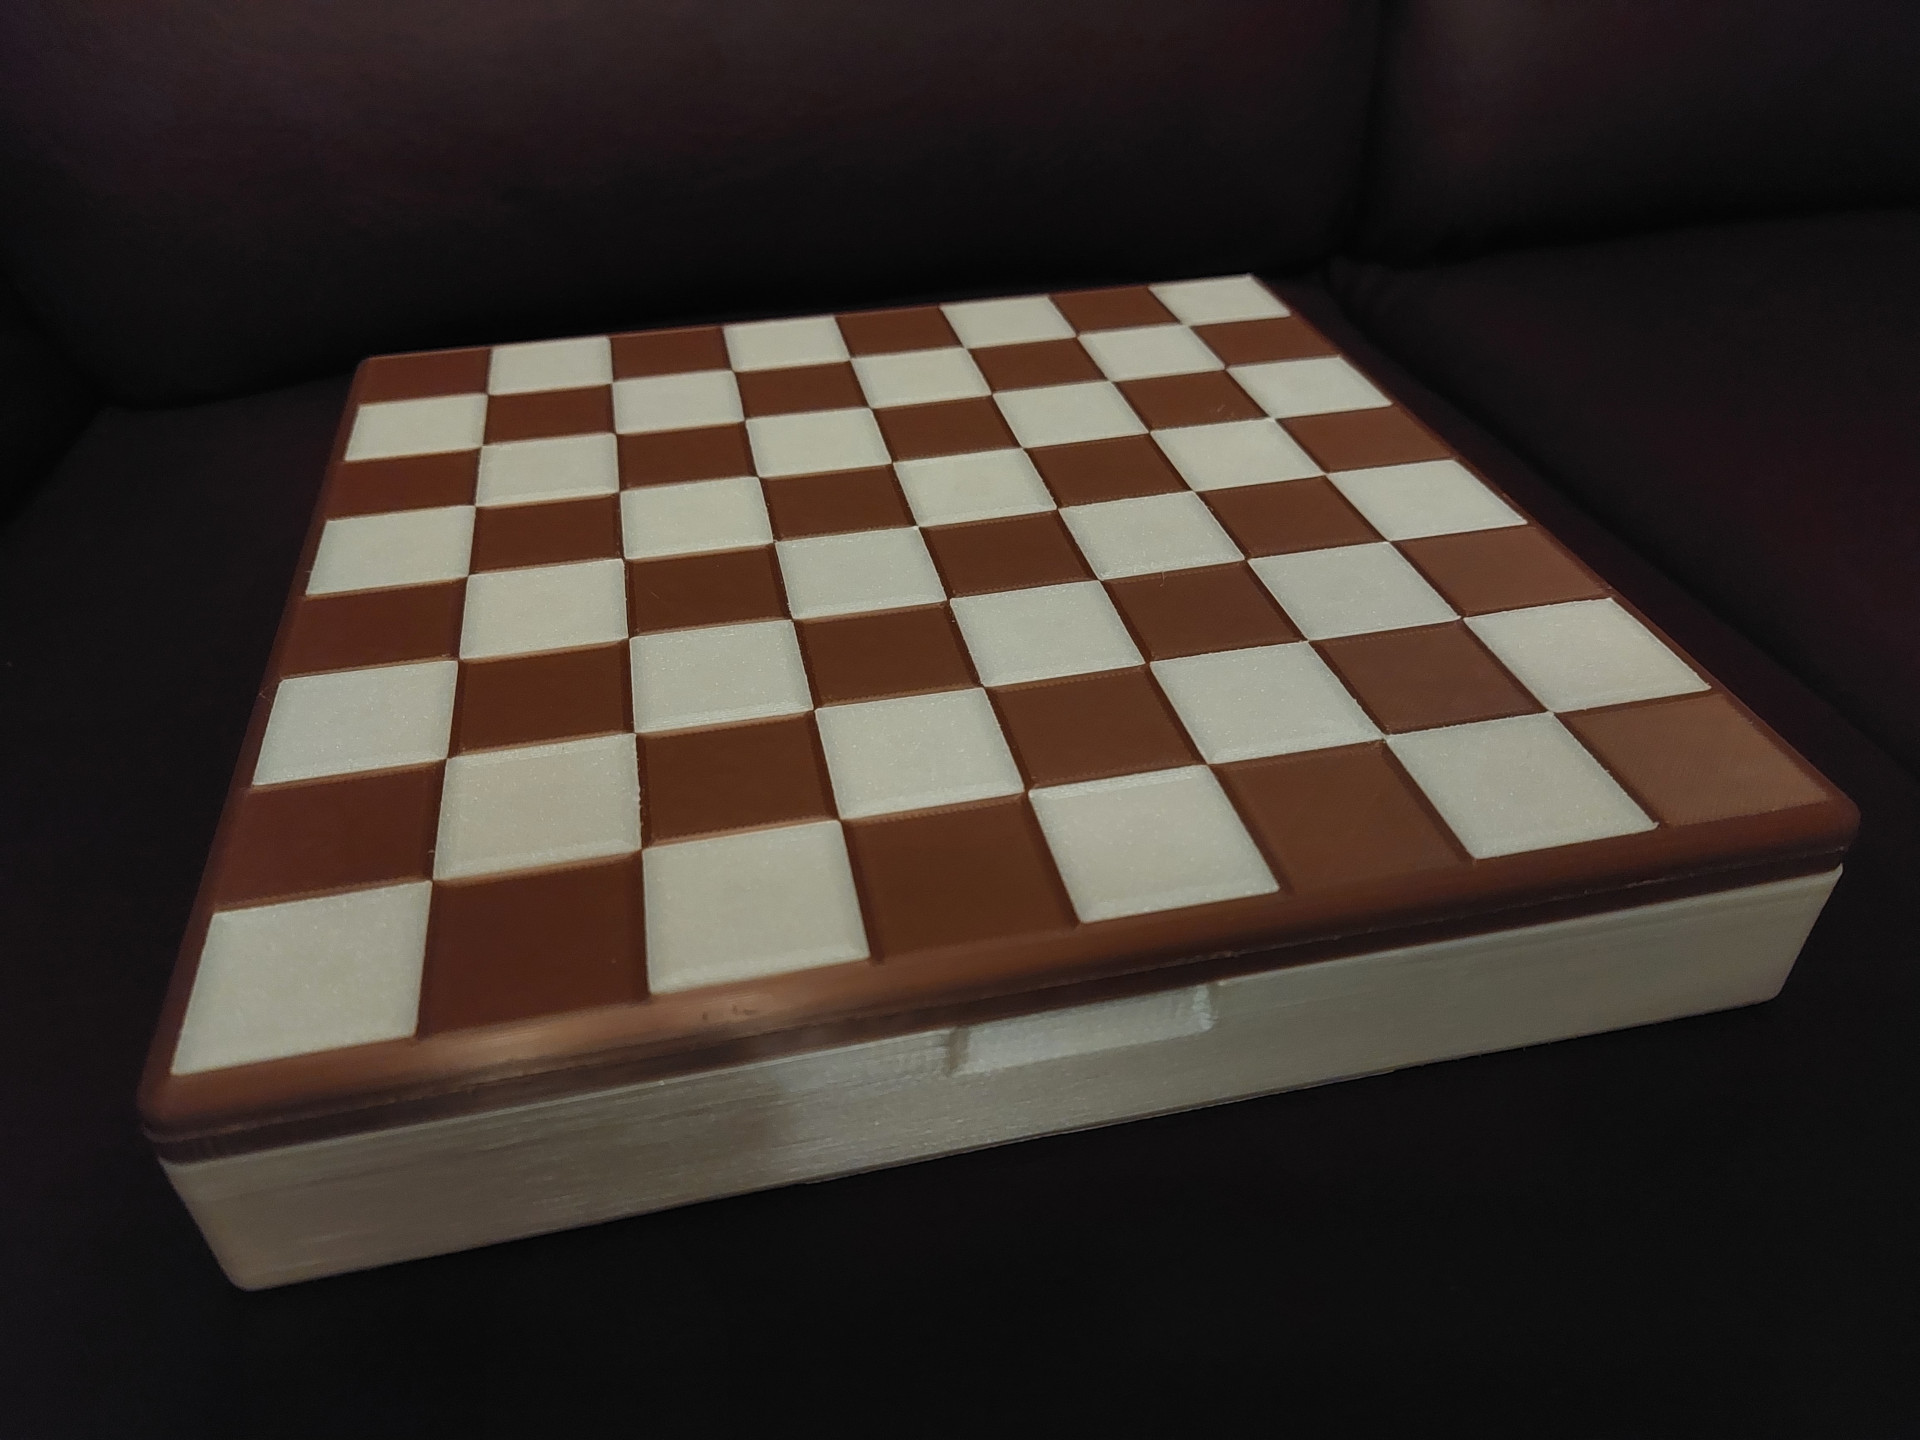 Chess Notes for My Next Move Checked Notebook : 6x9 inch daily bullet notes  on checkered design creamy colored pages with classic chess board design